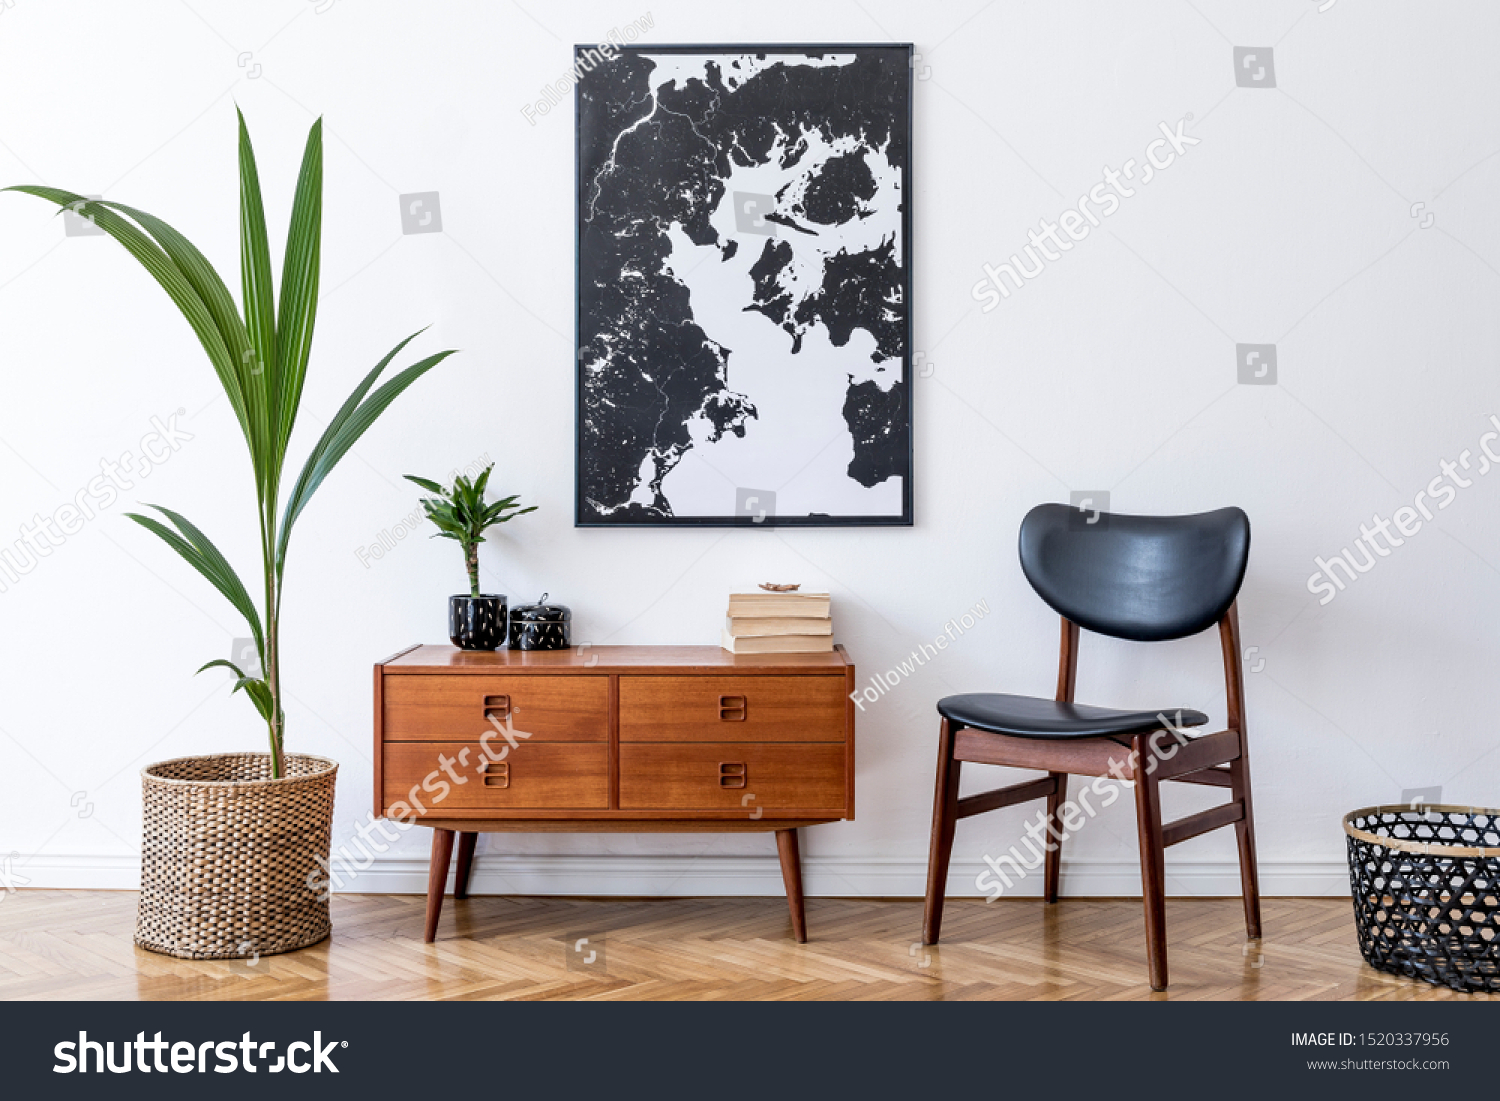 Stylish interior design of living room with wooden retro commode, chair, tropical plant in rattan pot, basket and elegant personal accessories. Mock up poster frame on the wall. Template. Home decor. #1520337956